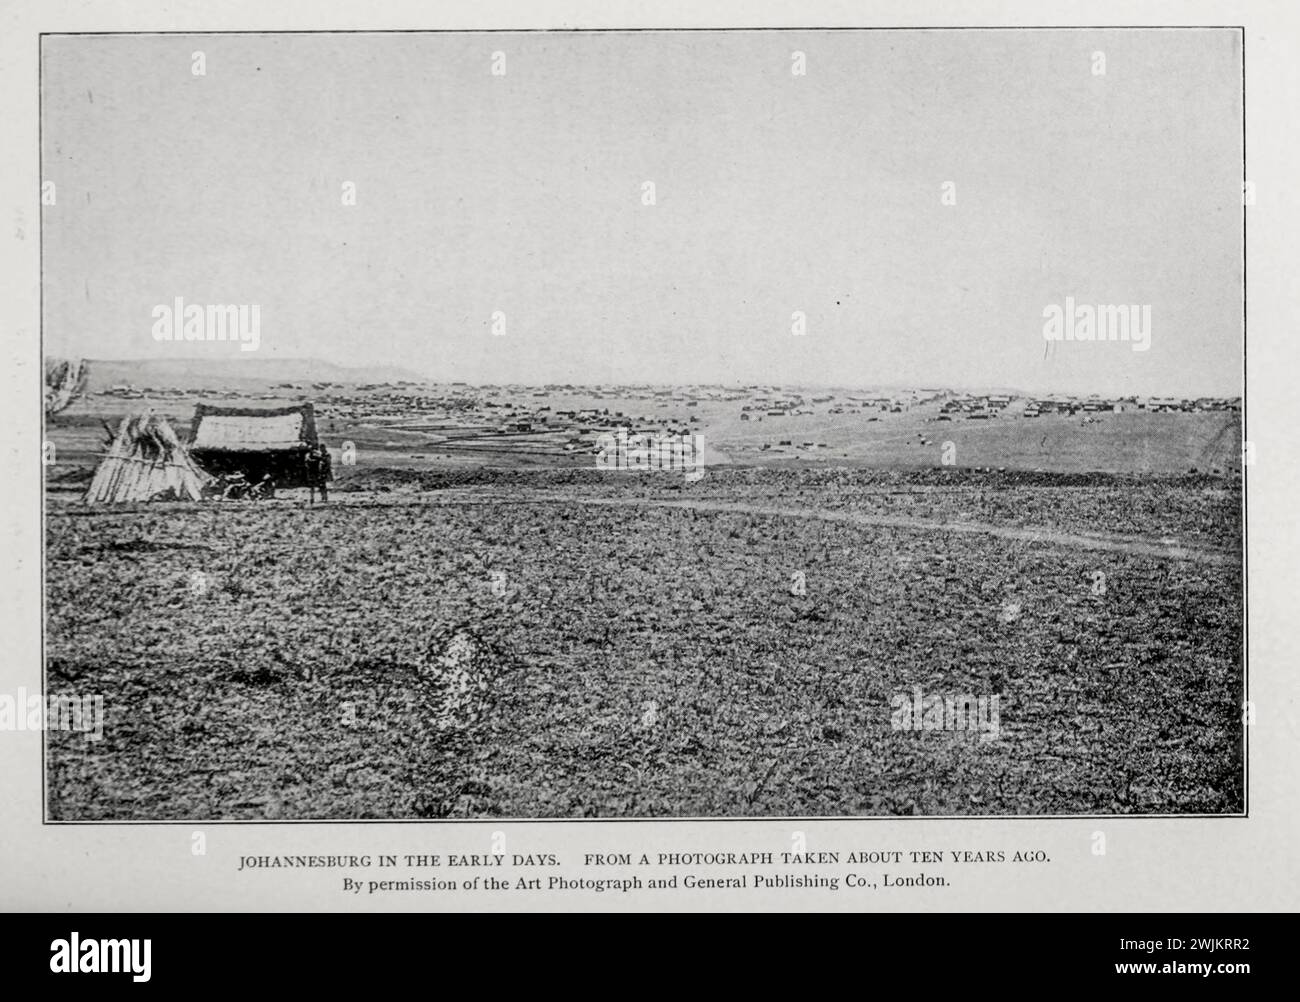 Johannesburg in the early days circa 1885 from the Article THE GOLD MINES OF THE WITWATERSRAND, SOUTH AFRICA. By John Hays Hammond. Part 1: THEIR RAPID DEVELOPMENT, AND THE GEOLOGY OF THE REGION. from The Engineering Magazine Devoted to Industrial Progress Volume XIV October 1897 - March 1898 The Engineering Magazine Co Stock Photo